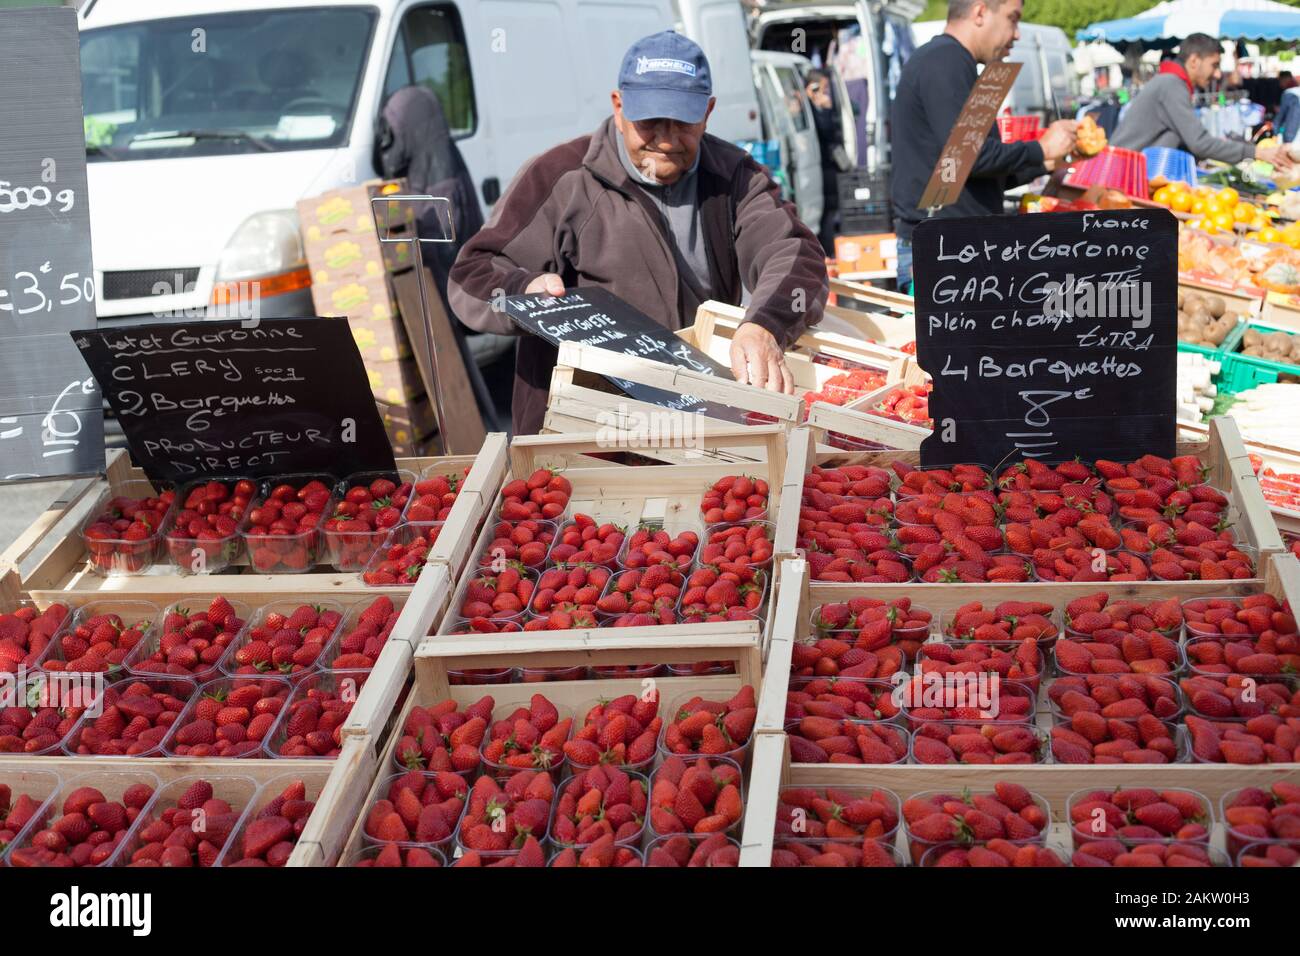 Clery and Gariguette strawberries an old French variety sold in Nay market, Pyrenees Atlantiques, Nouvelle Aquitaine, France Stock Photo